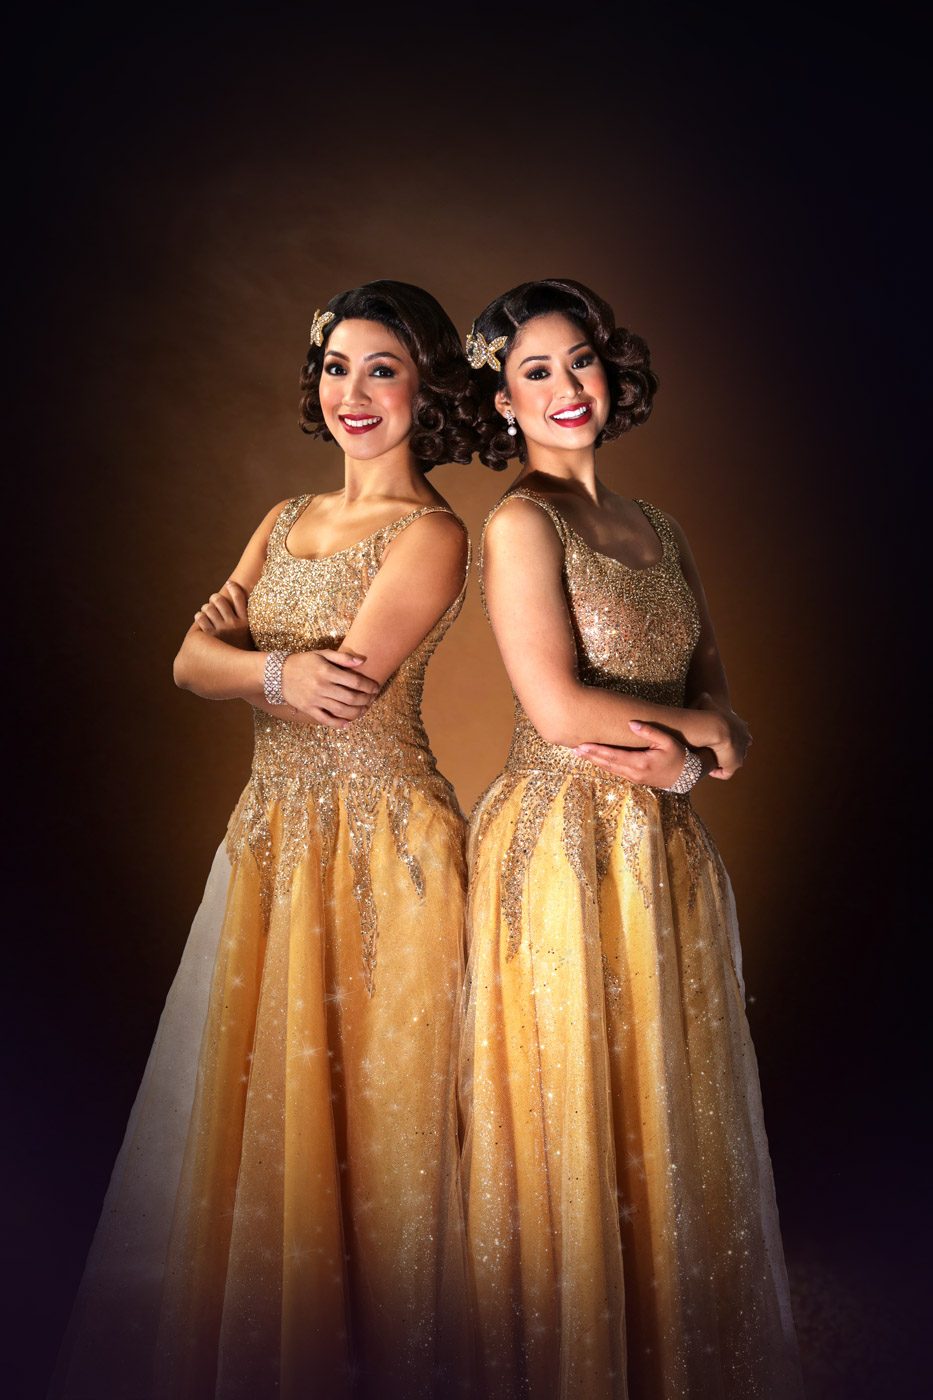 CLASHES AND BOND. Gab  and Kayla share that the show will look into the struggles and bond of the conjoined twins, as they rose to fame during the Vaudeville era. 